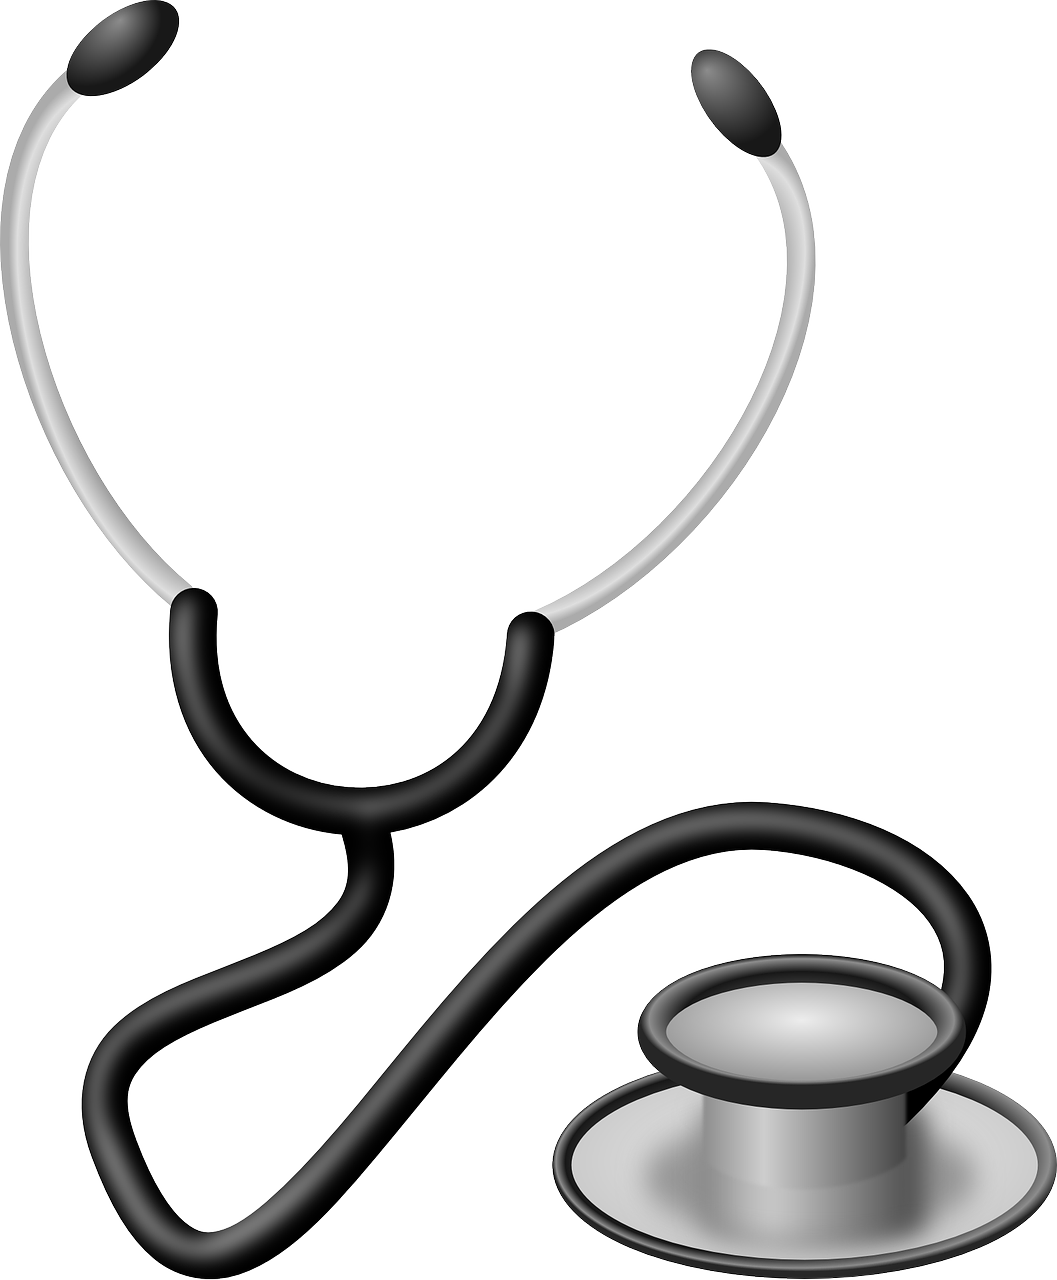 a stethoscope with a stethoscope attached to it, by Martina Krupičková, black and white vector art, computer - generated, screw, three - quarter view